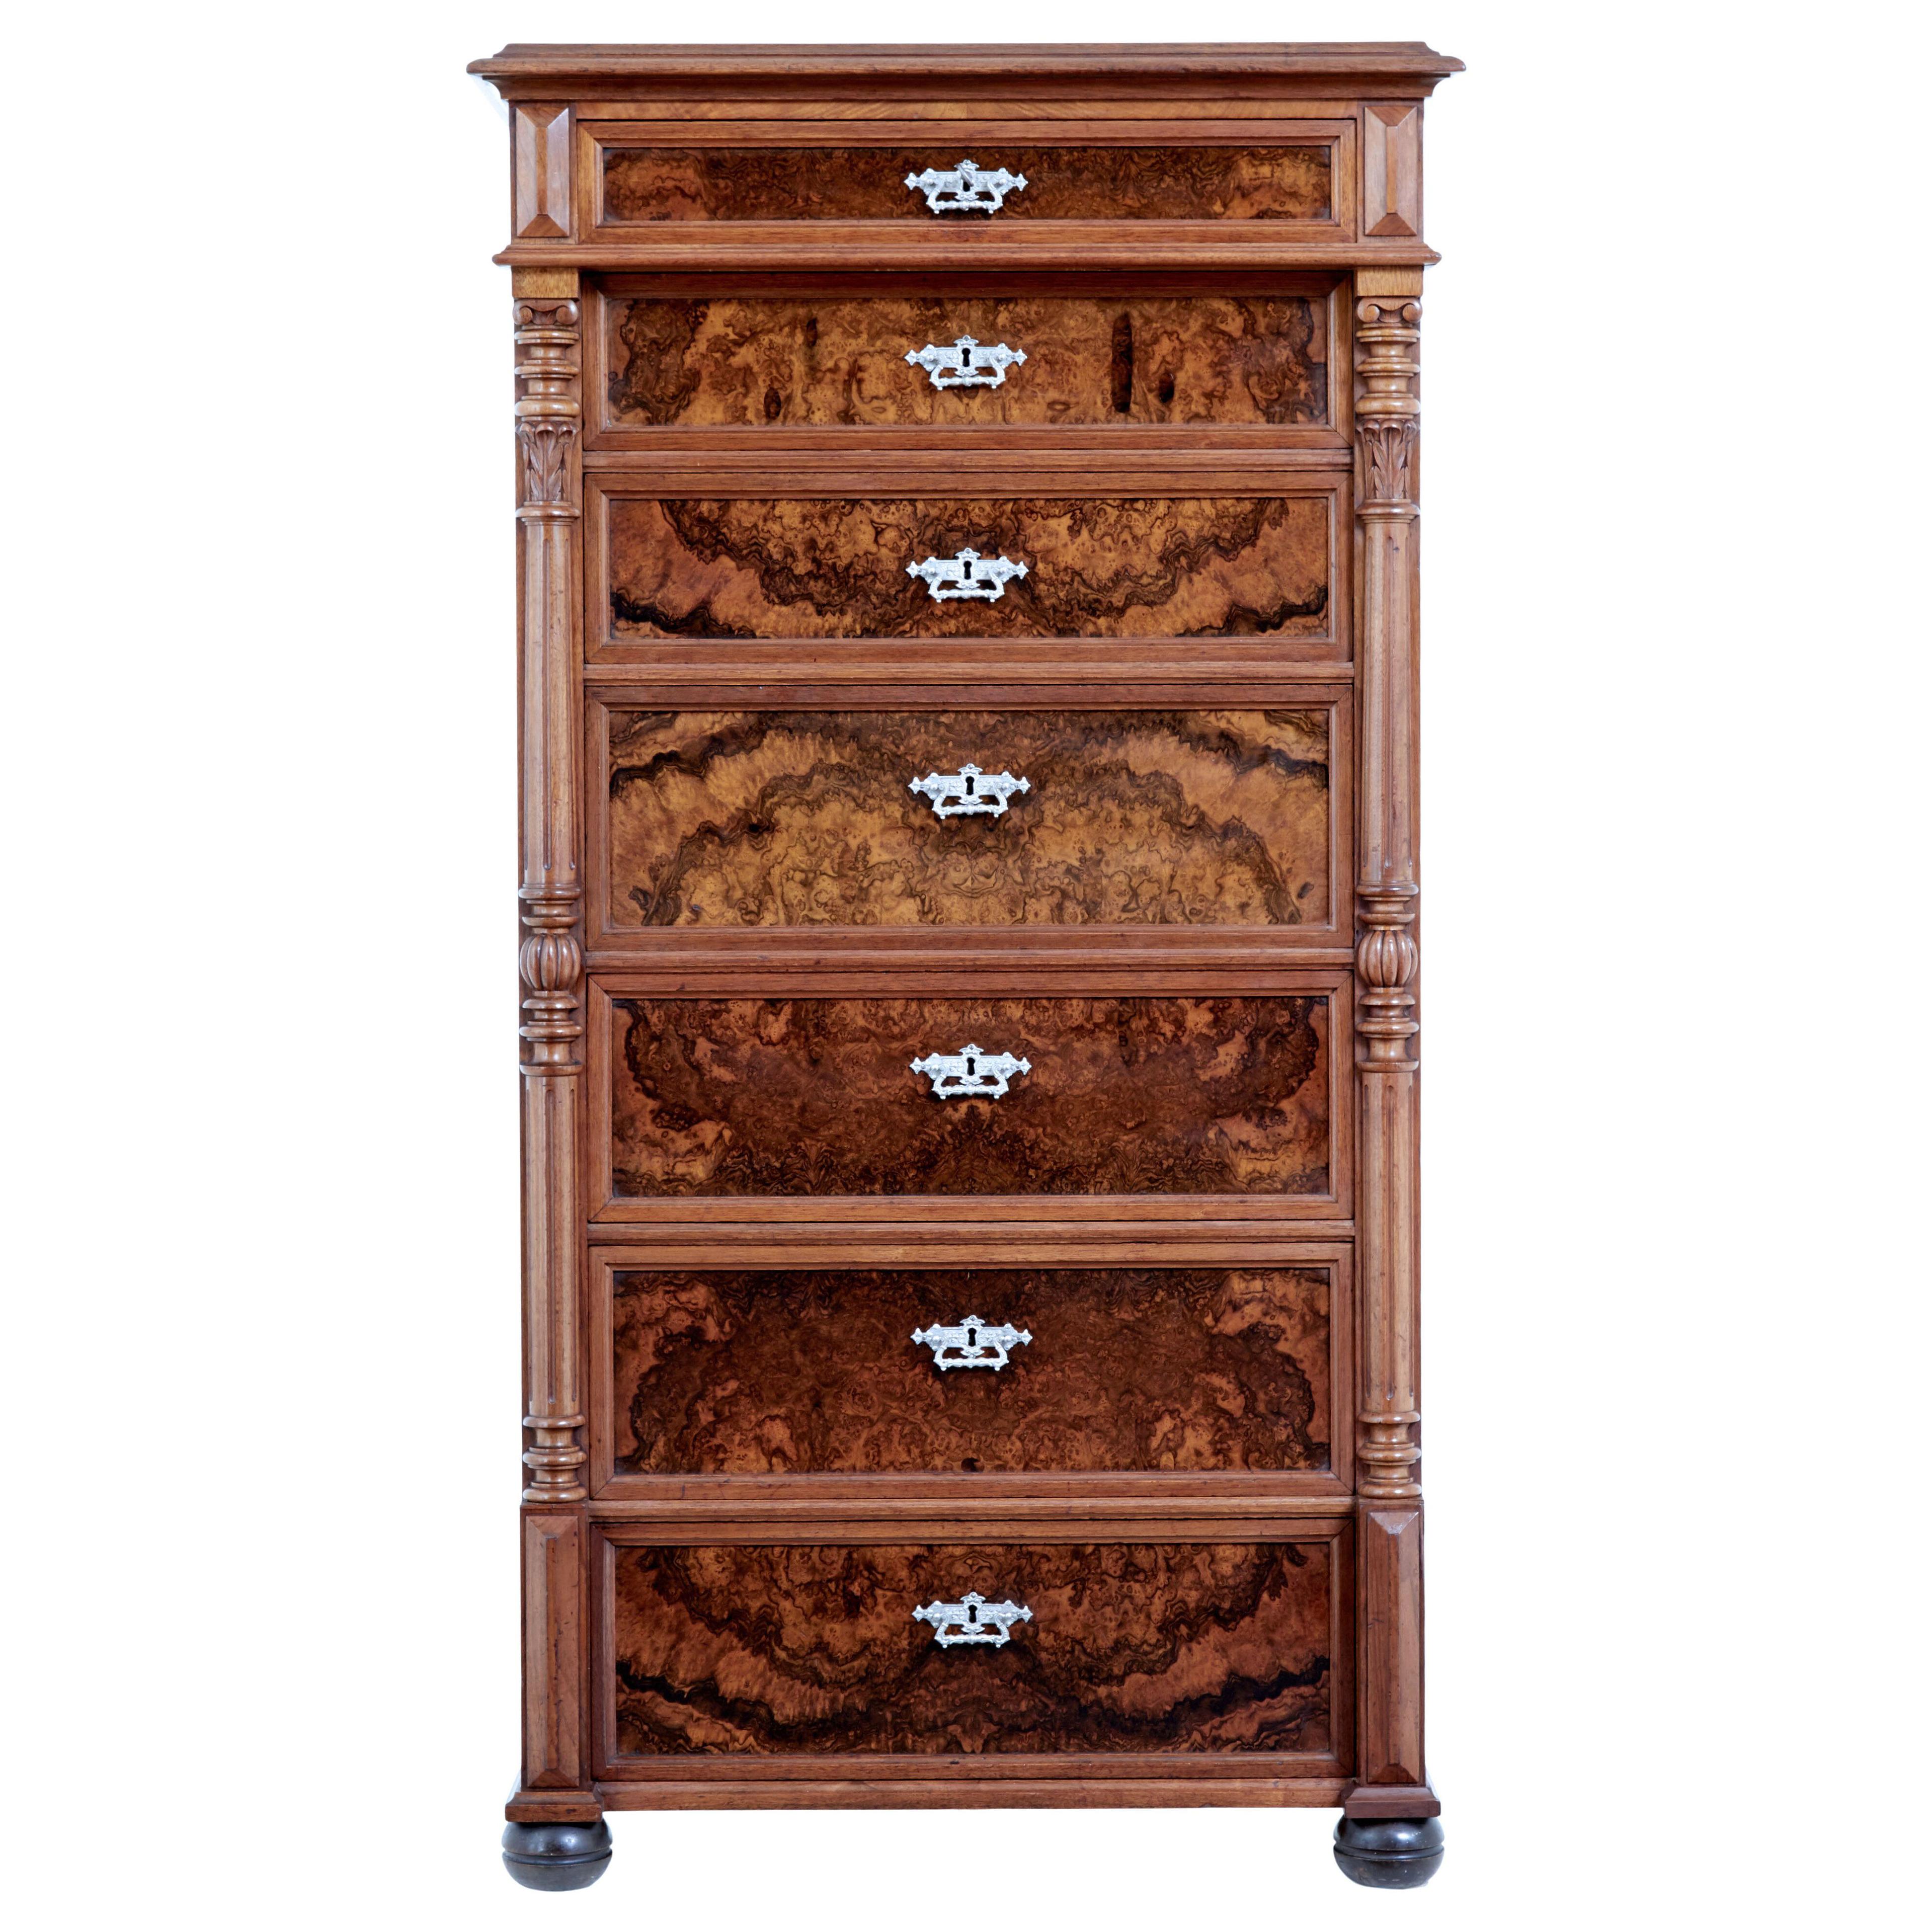 19TH CENTURY BURR WALNUT SECRETAIRE TALL CHEST OF DRAWERS